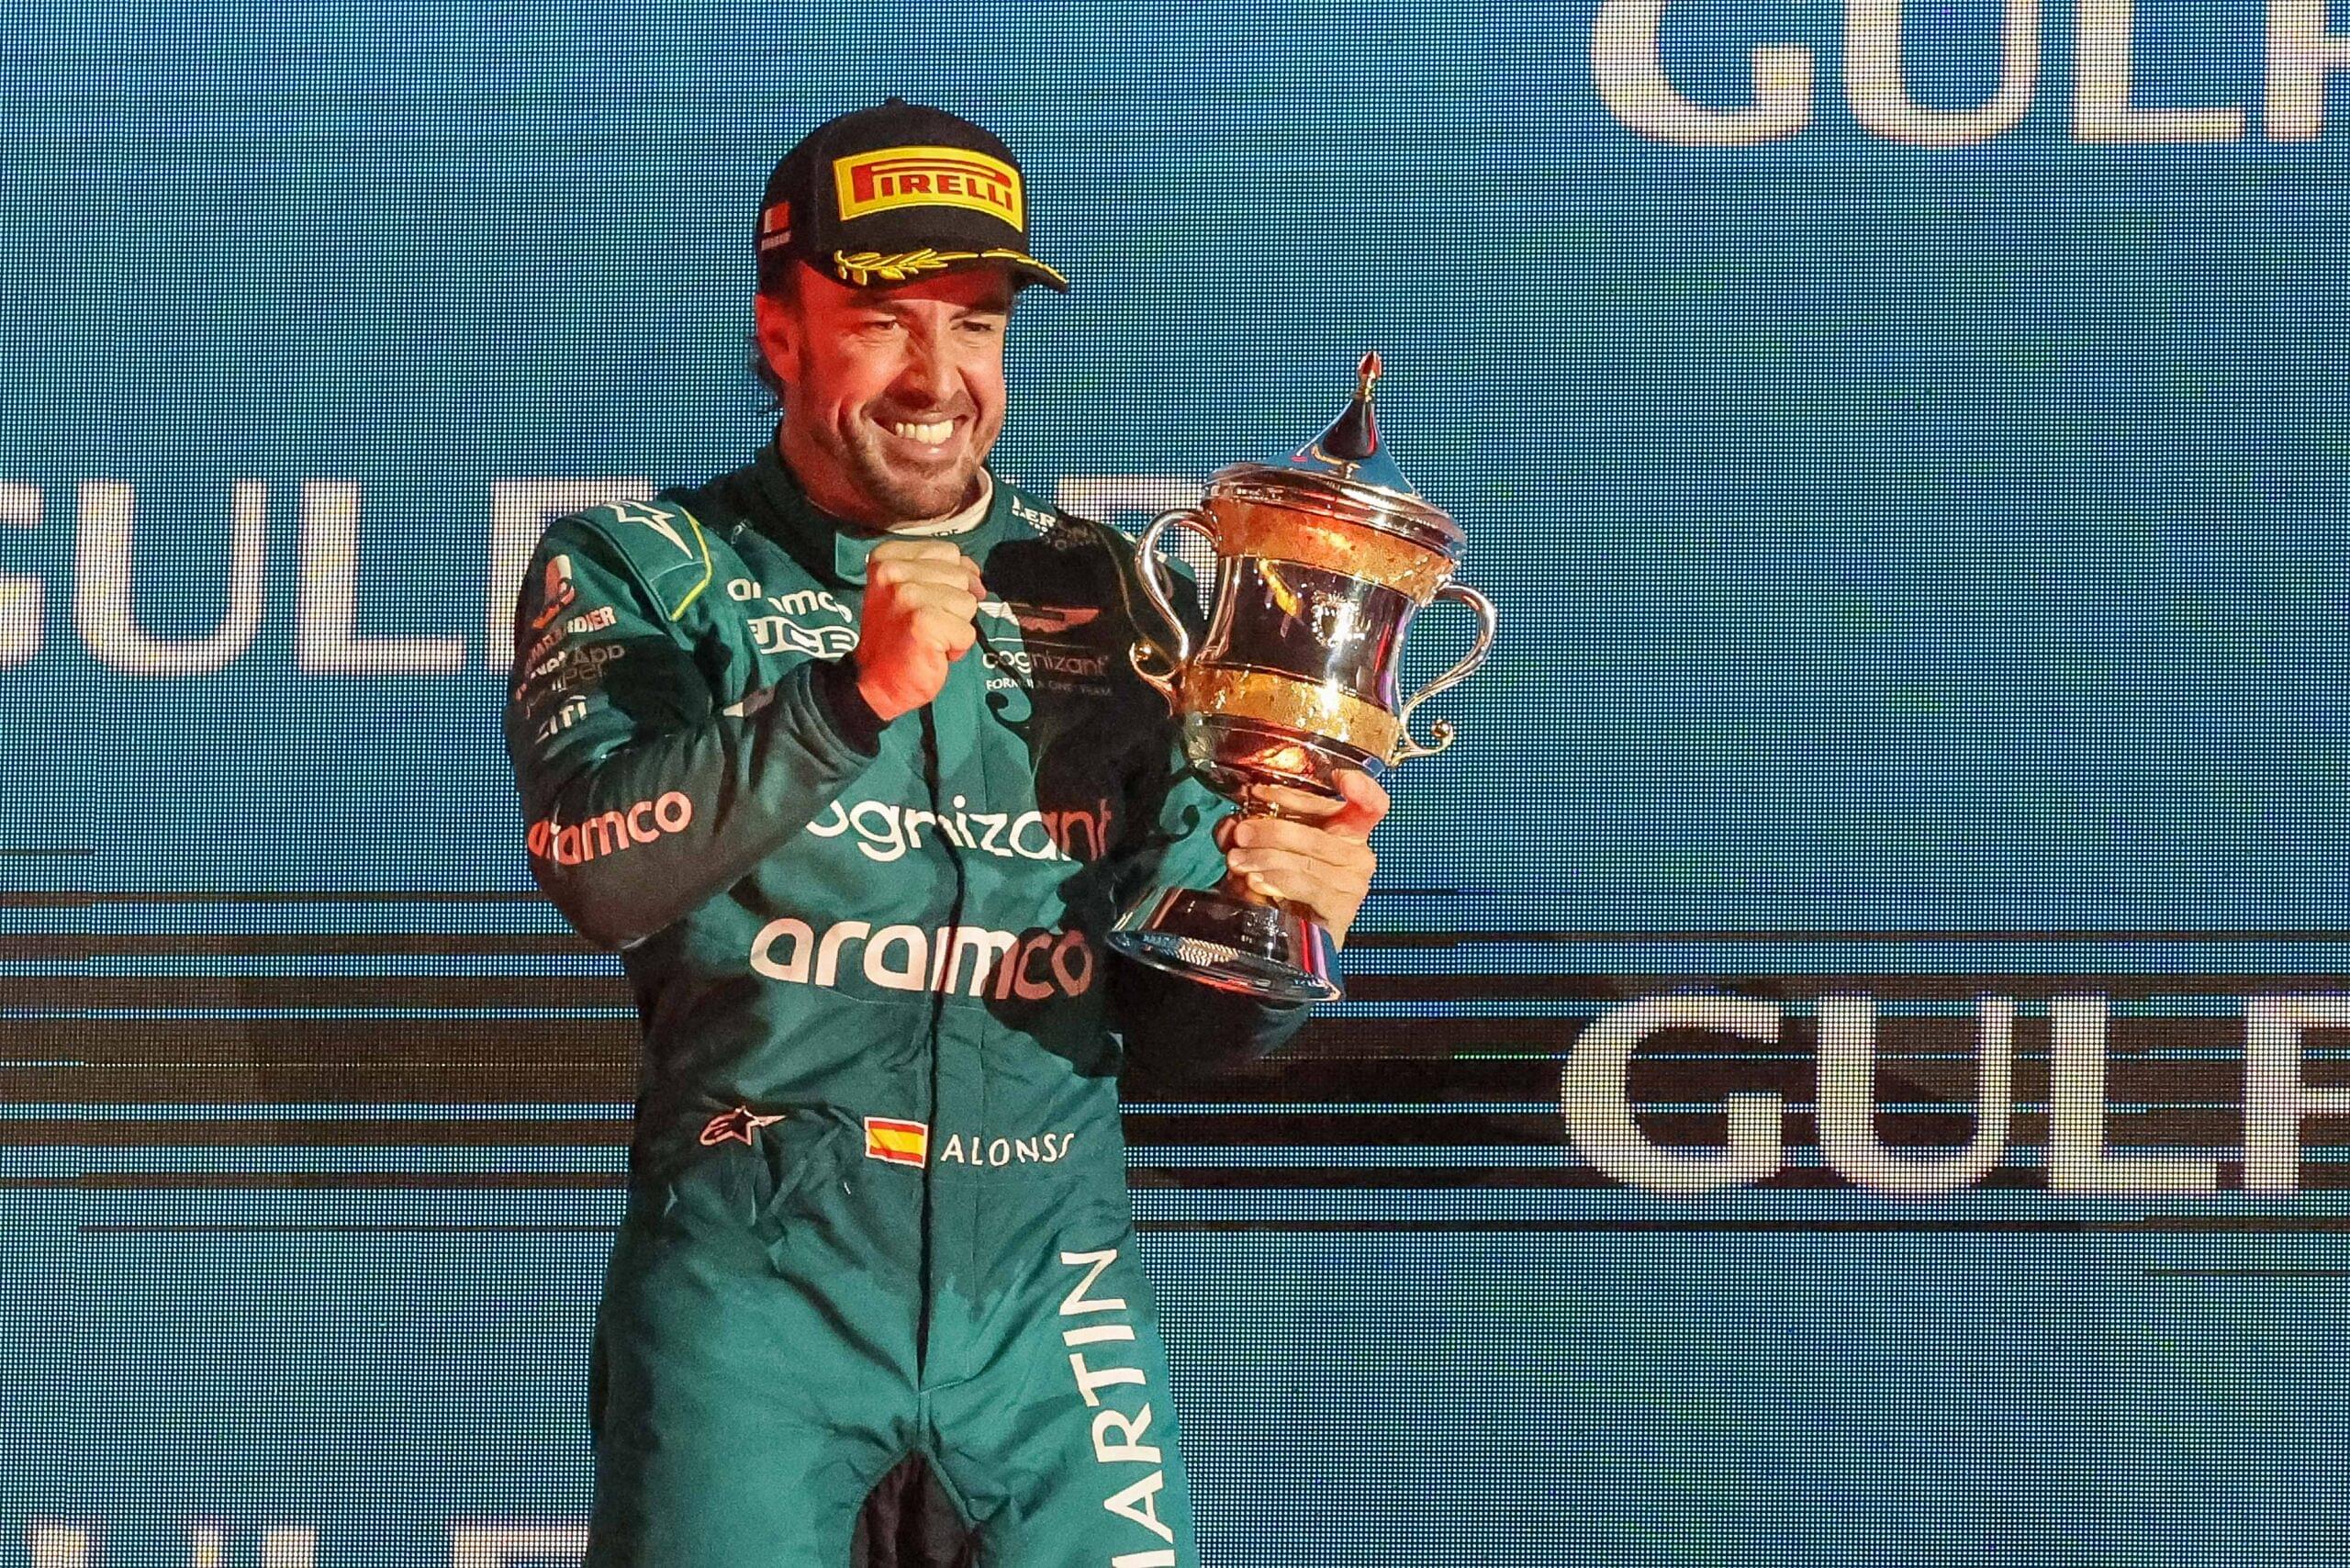 9 Years After Leaving Ferrari, Fernando Alonso Never Felt "This Confident" in His Career